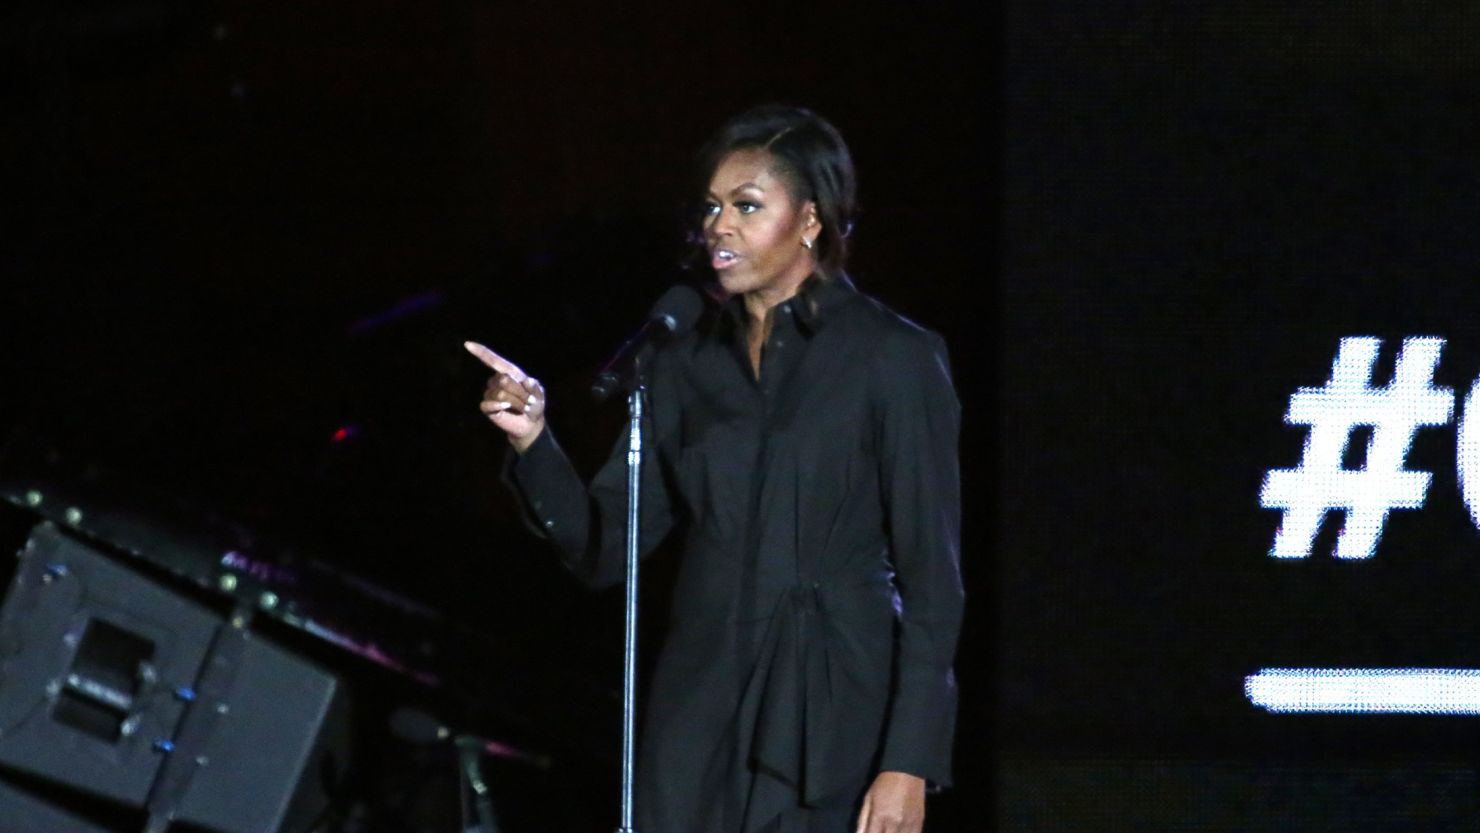 Michelle Obama appeared onstage and in a videotaped message Saturday at the Global Citizen Festival in New York.